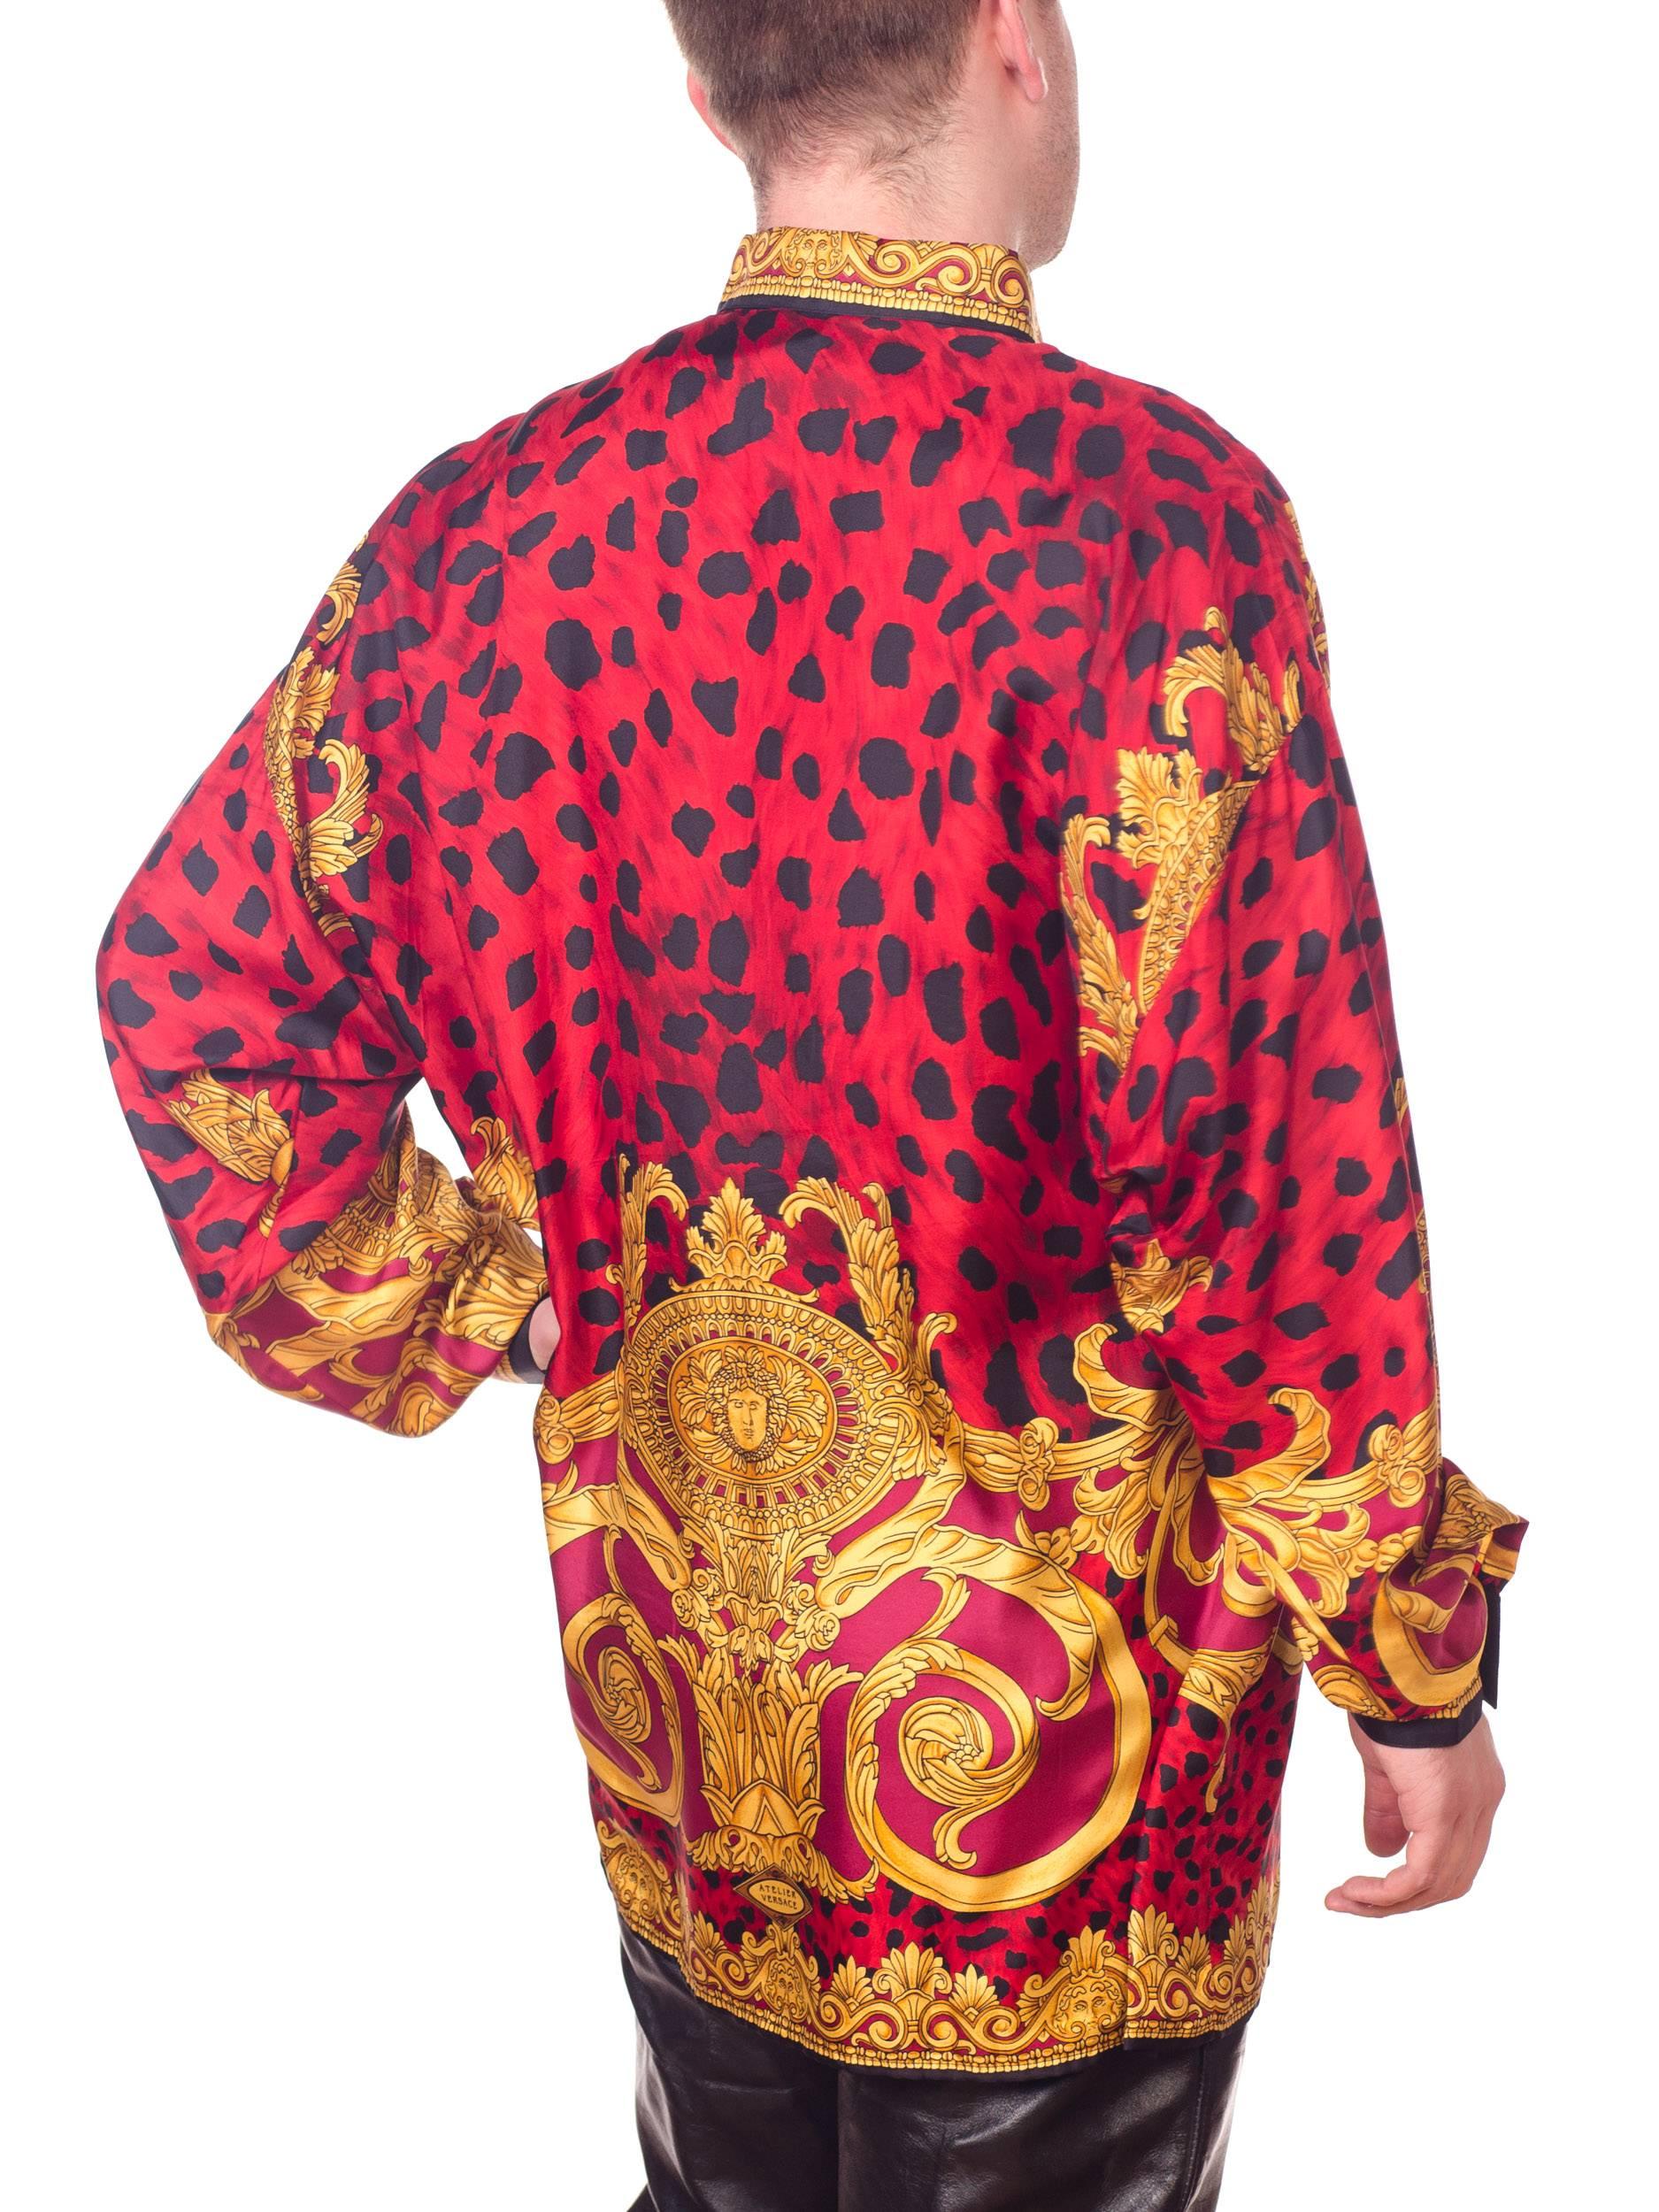 Gianni Versace early 1990s Mens Red Baroque Leopard Print Silk Shirt 4